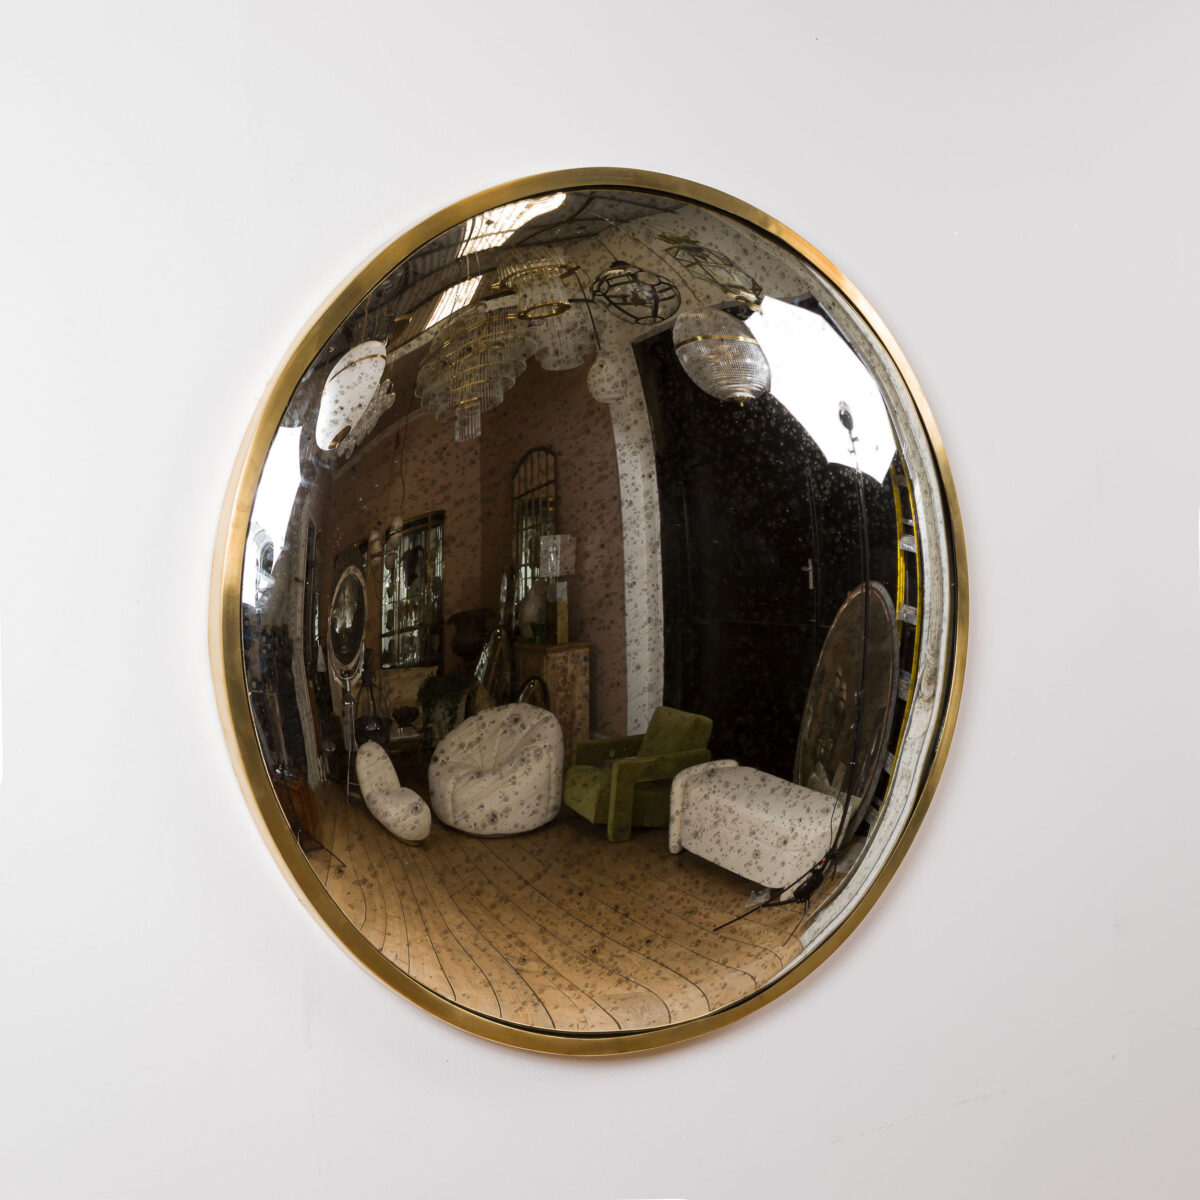 Aged Glass Brass Convex Mirror  - 3 Sizes Available